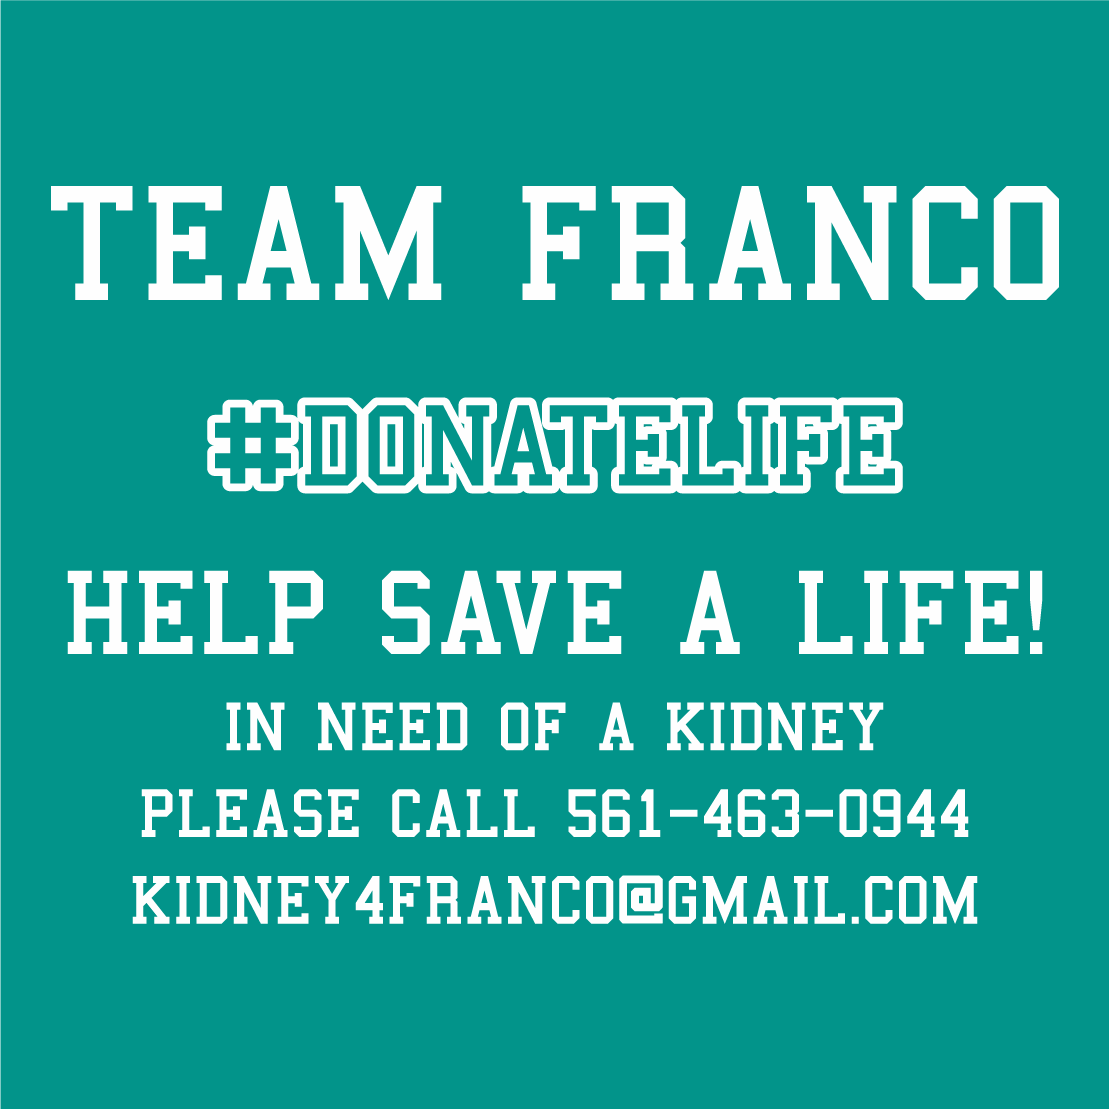 Team Franco Kidney Search shirt design - zoomed